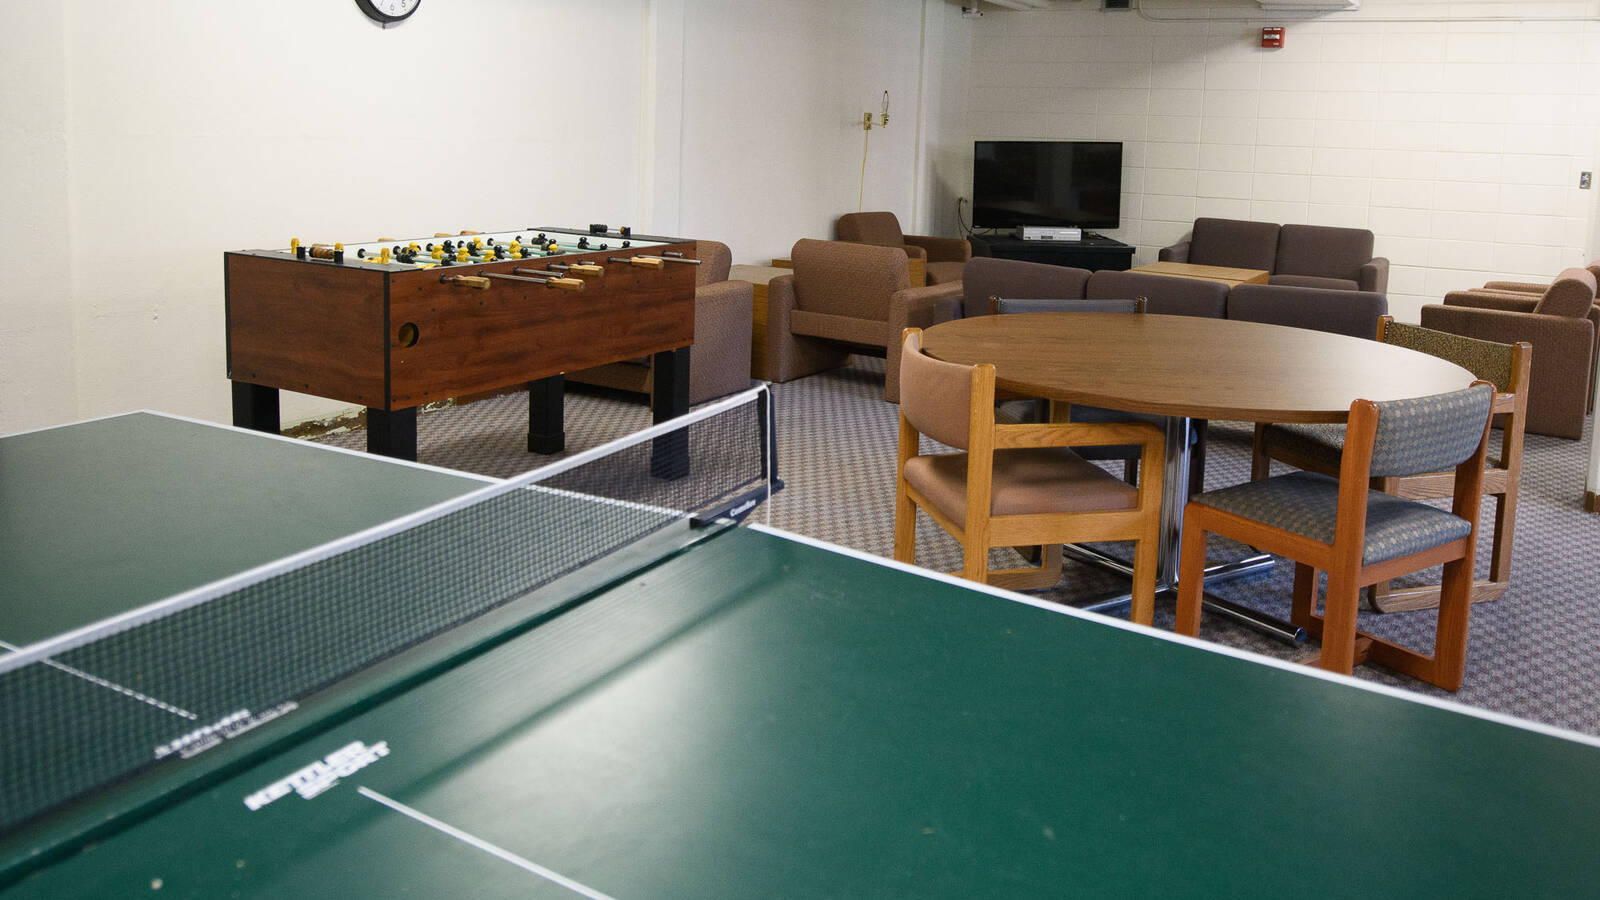 A common space in a residence hall with ping pong, foosball, a TV and seating